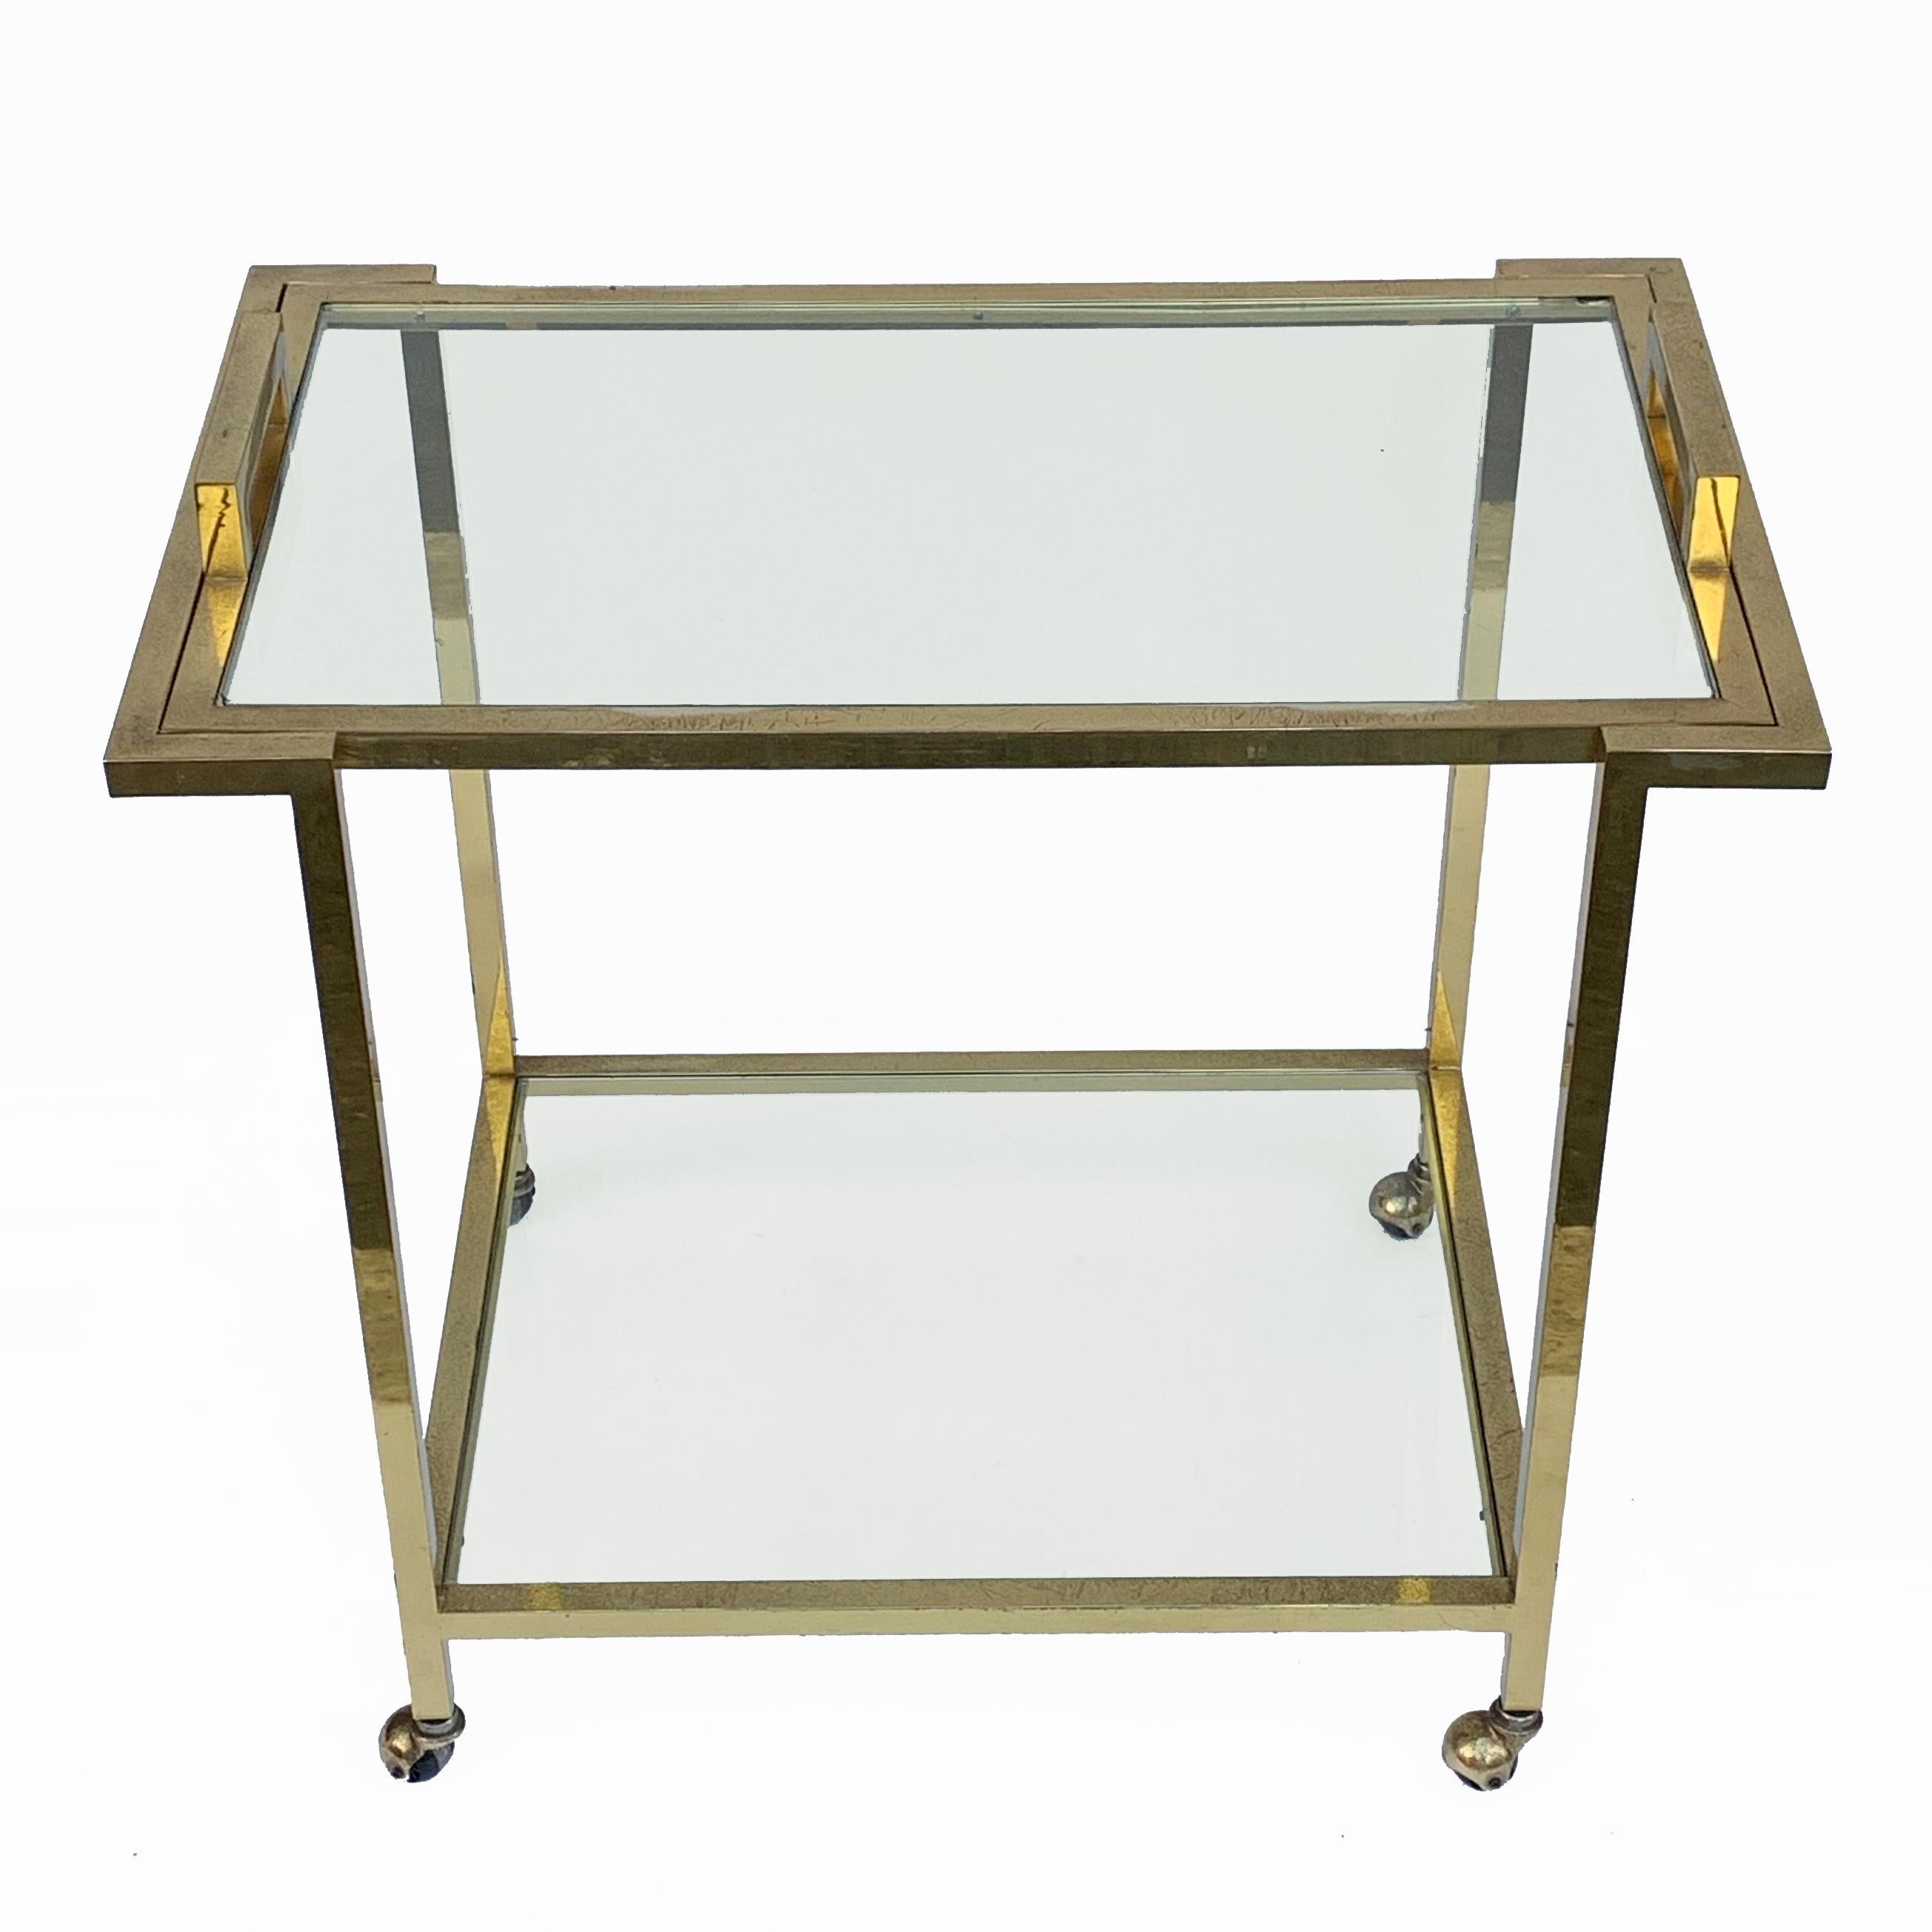 Romeo Rega style Trolley with Service Tray, Gilded Brass and Glass, Italy, 1980s For Sale 2